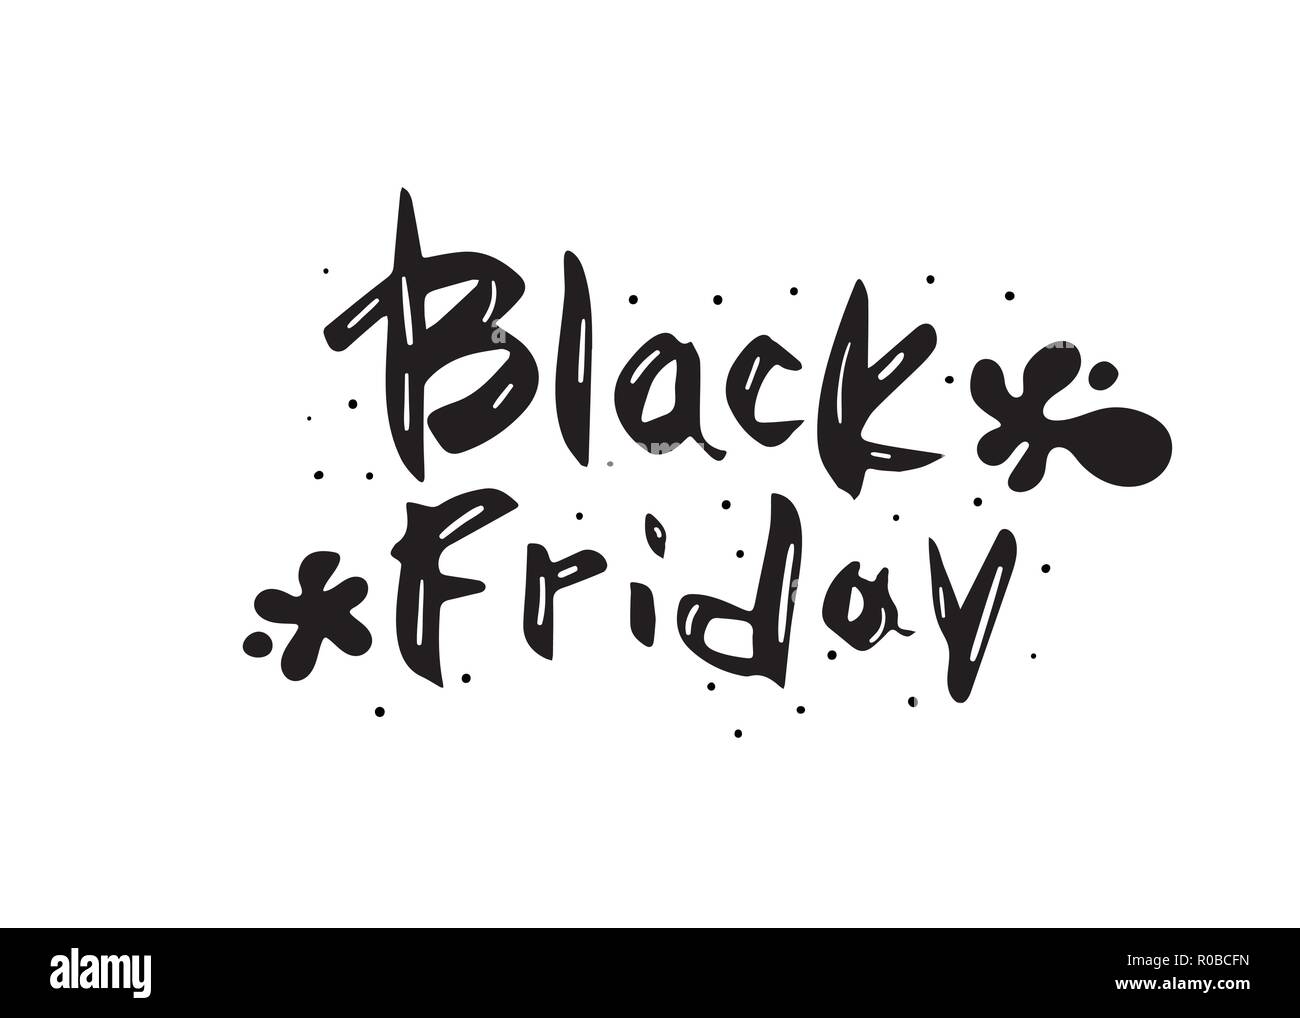 Black Friday text with decoration. Handwritten lettering for promotion. Stock Vector